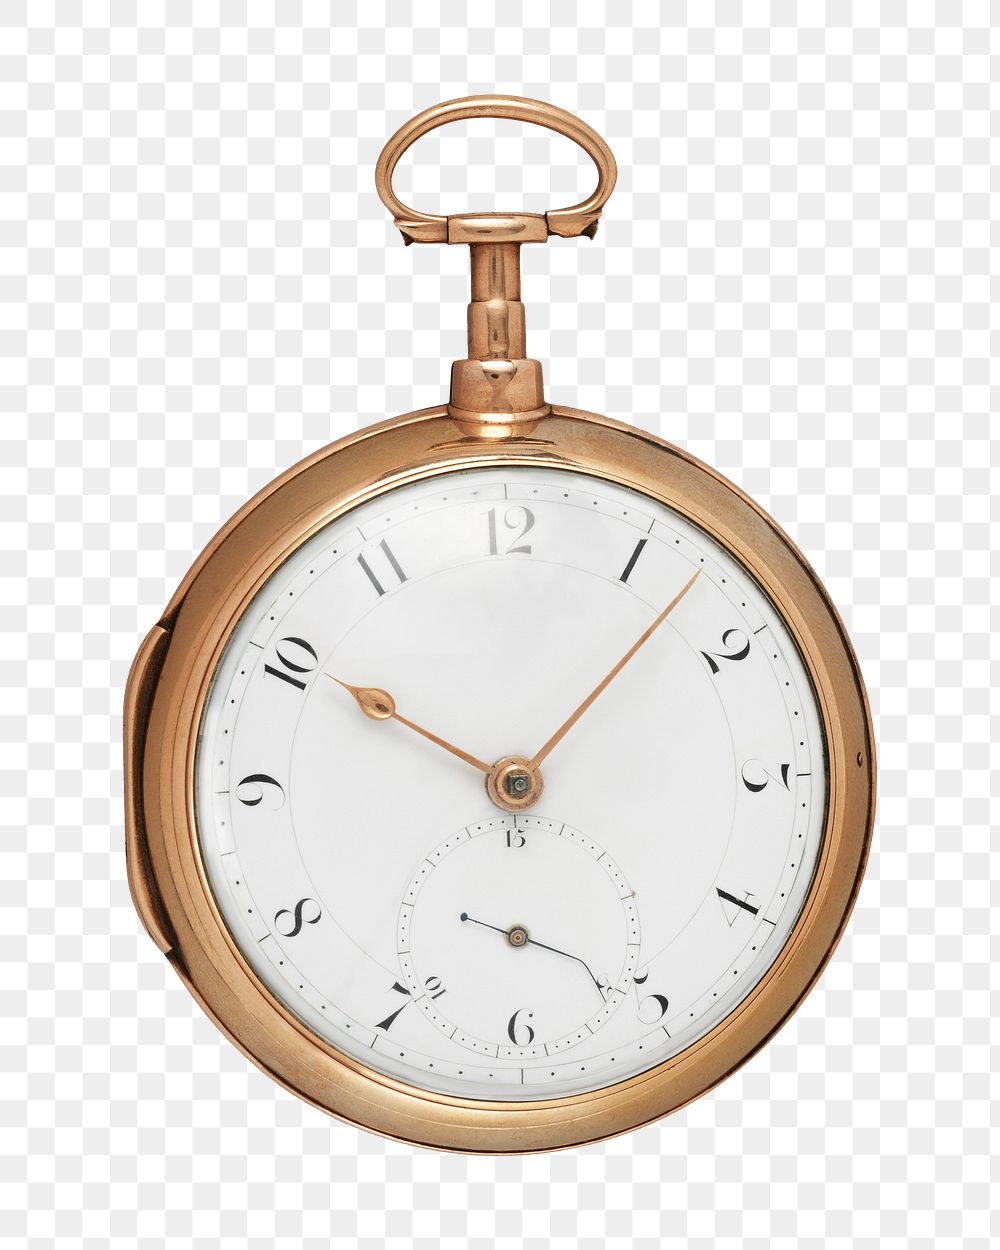 PNG Gold pocket watch, vintage object made by Robert Roskell, transparent background. Remixed by rawpixel.